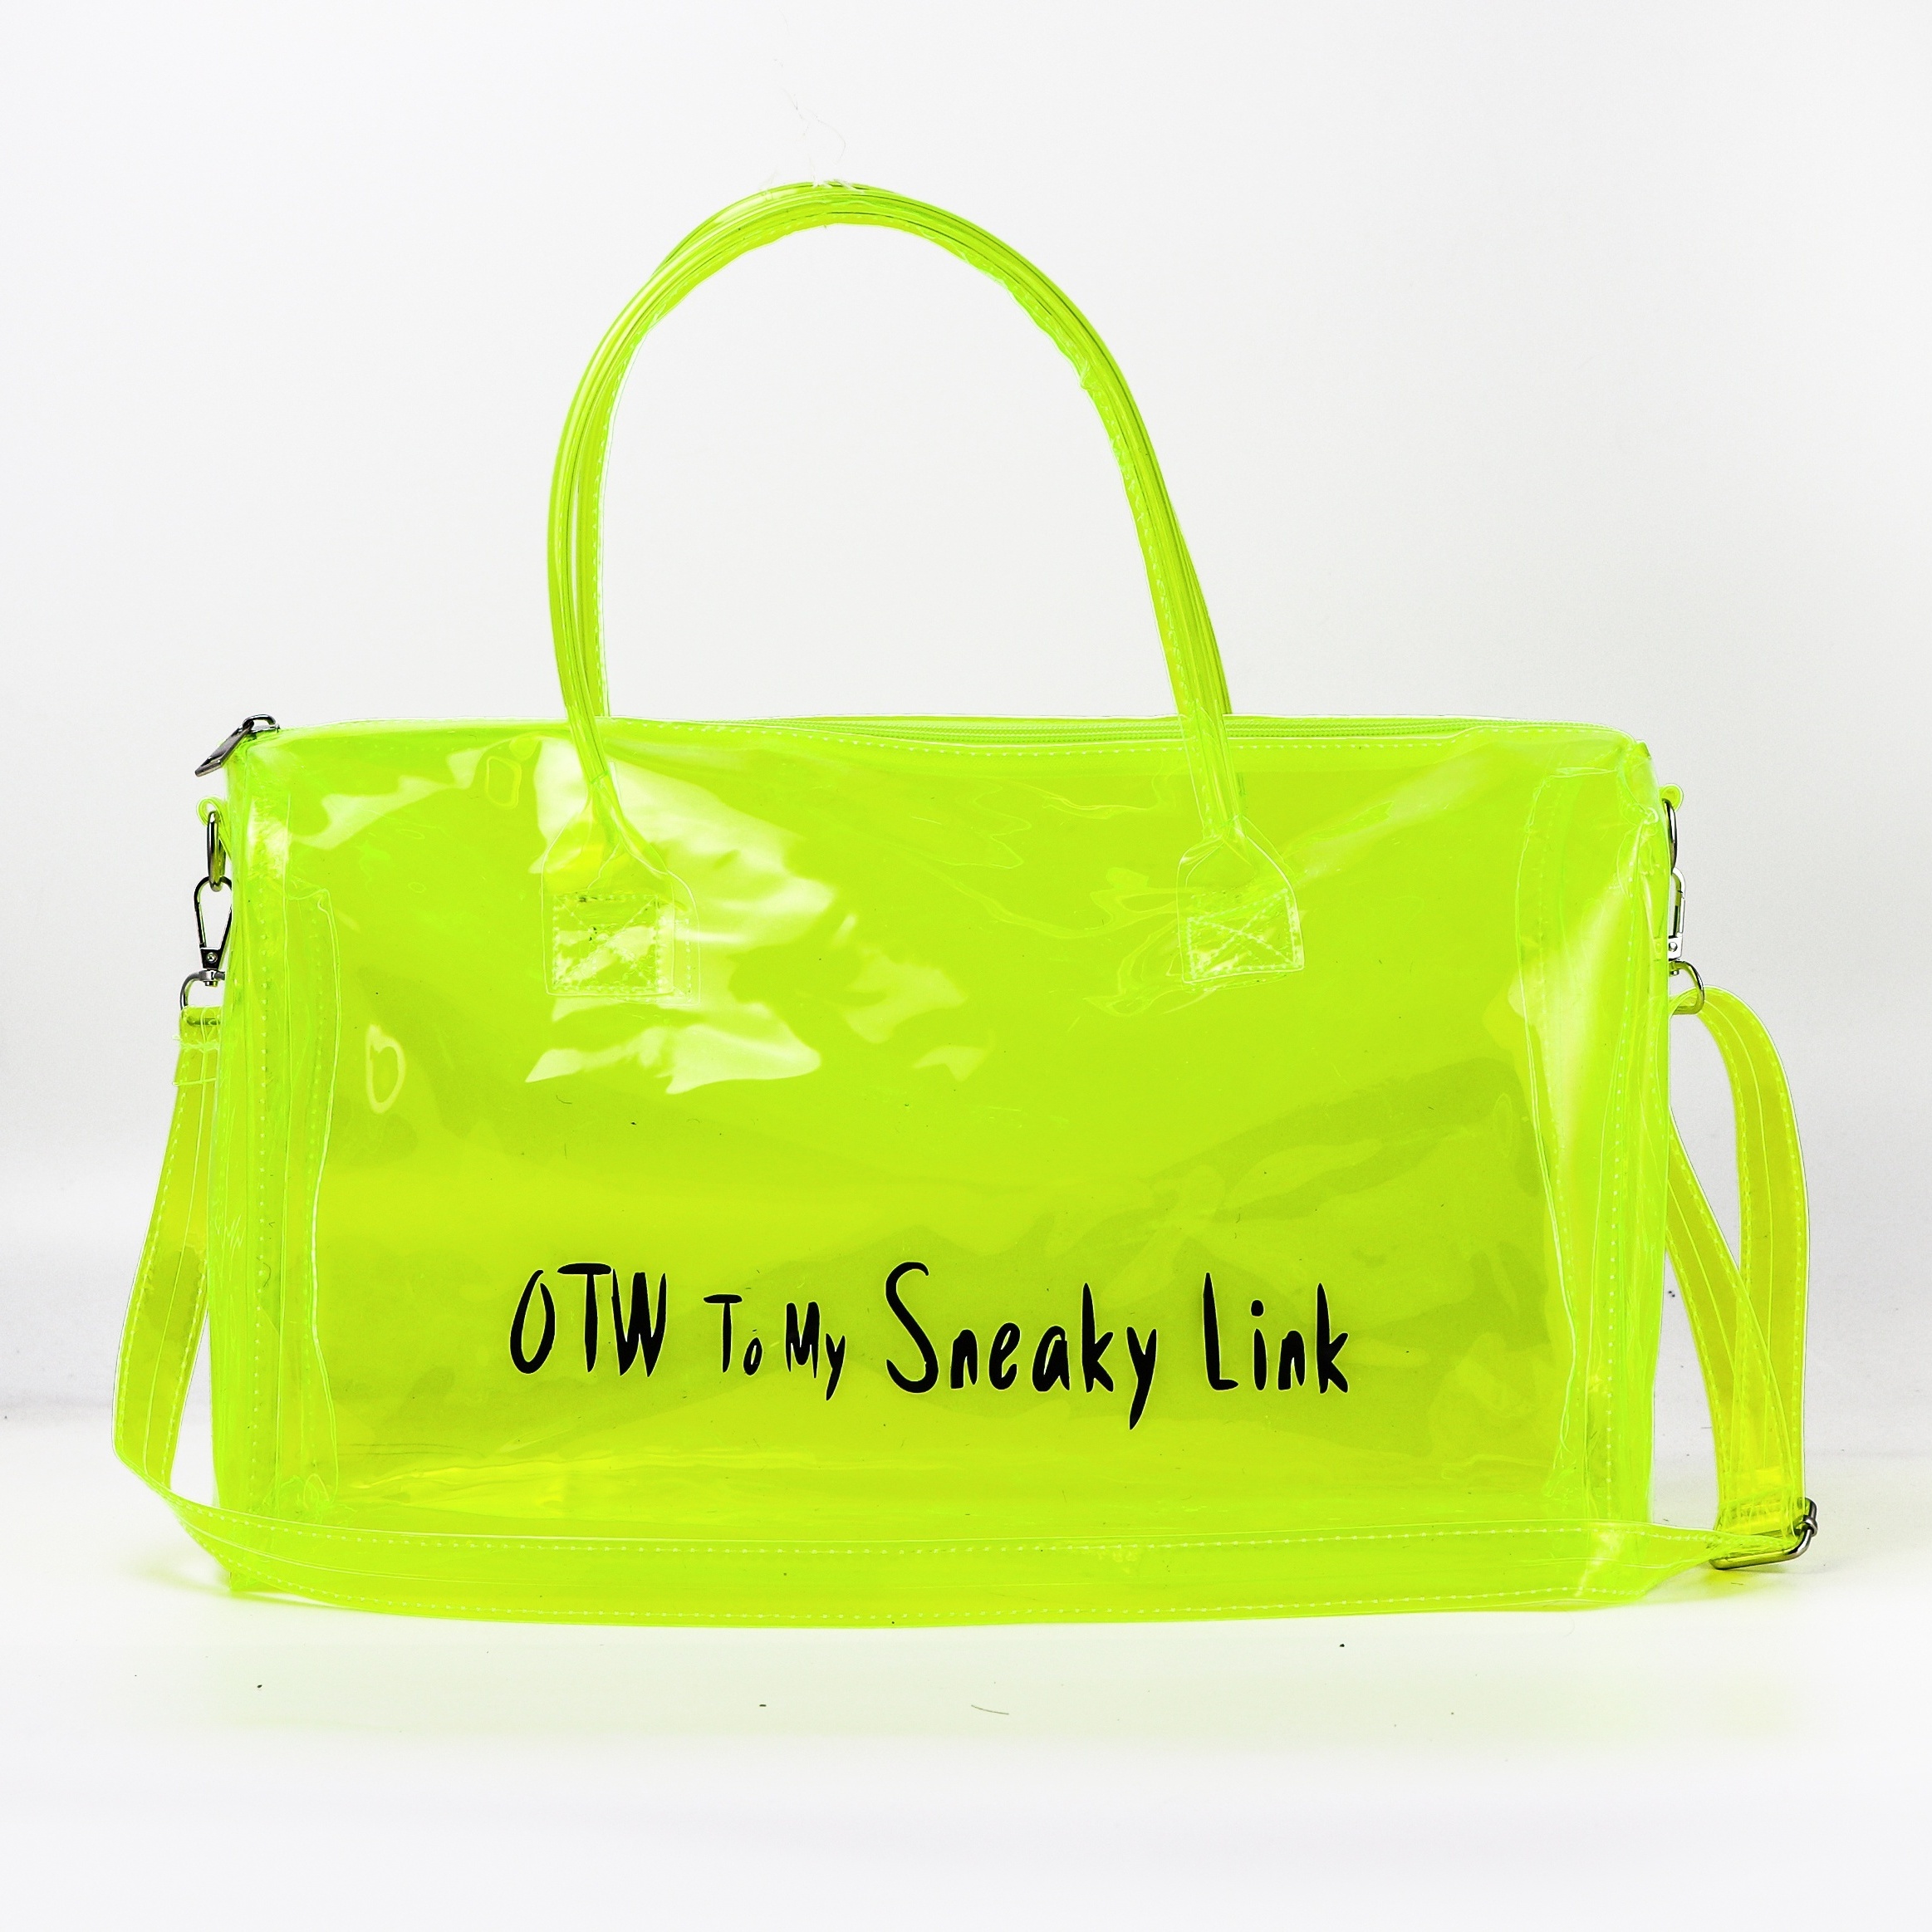 Durable Clear Plastic Tote Bags with Handles, Travel & Gym Tote